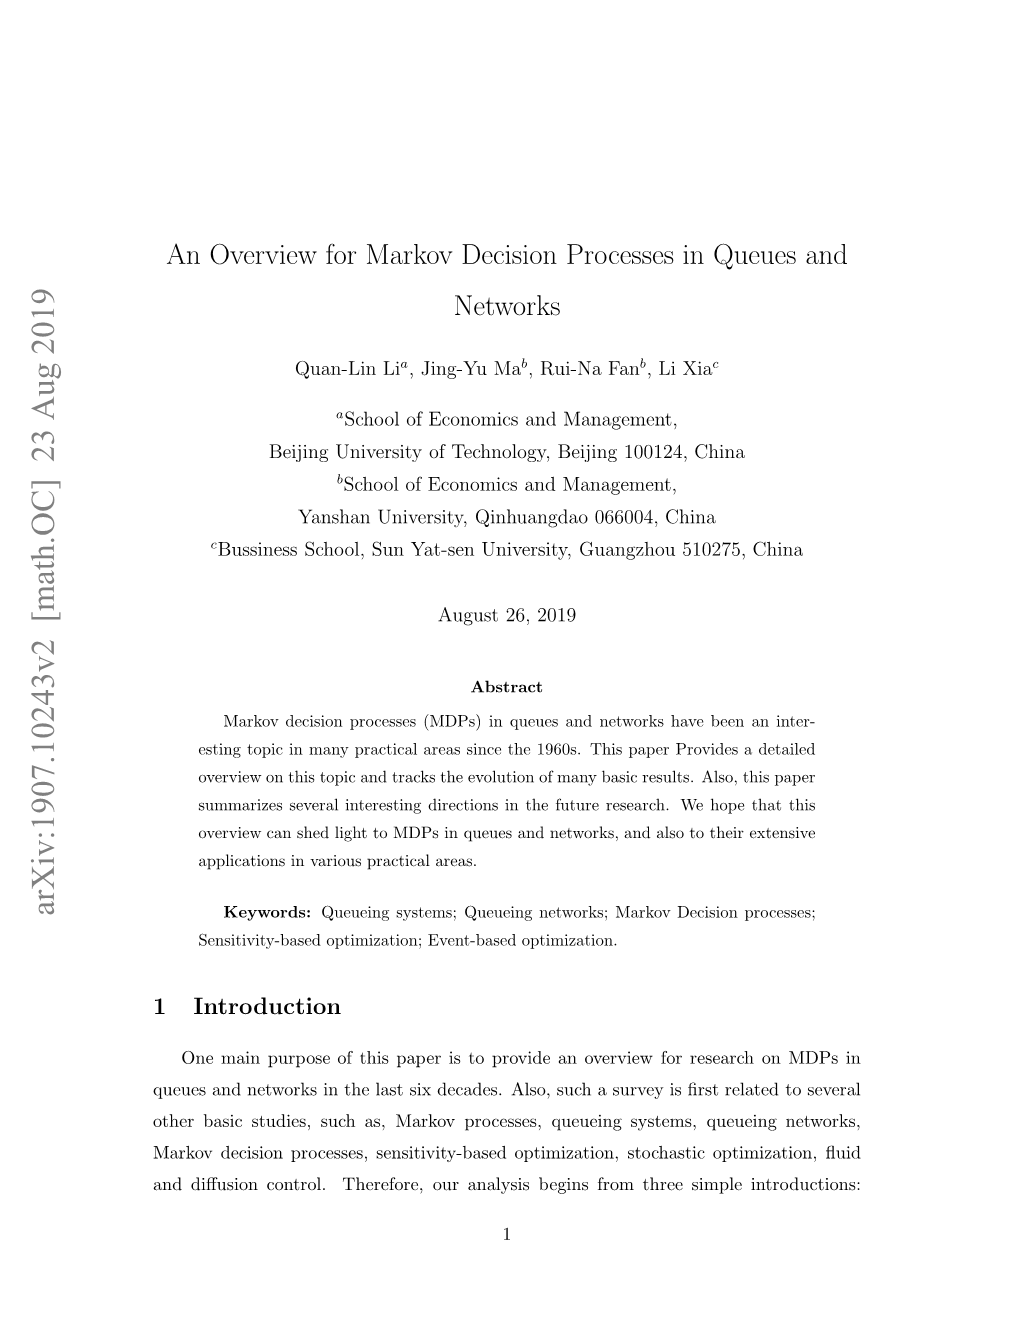 An Overview for Markov Decision Processes in Queues and Networks